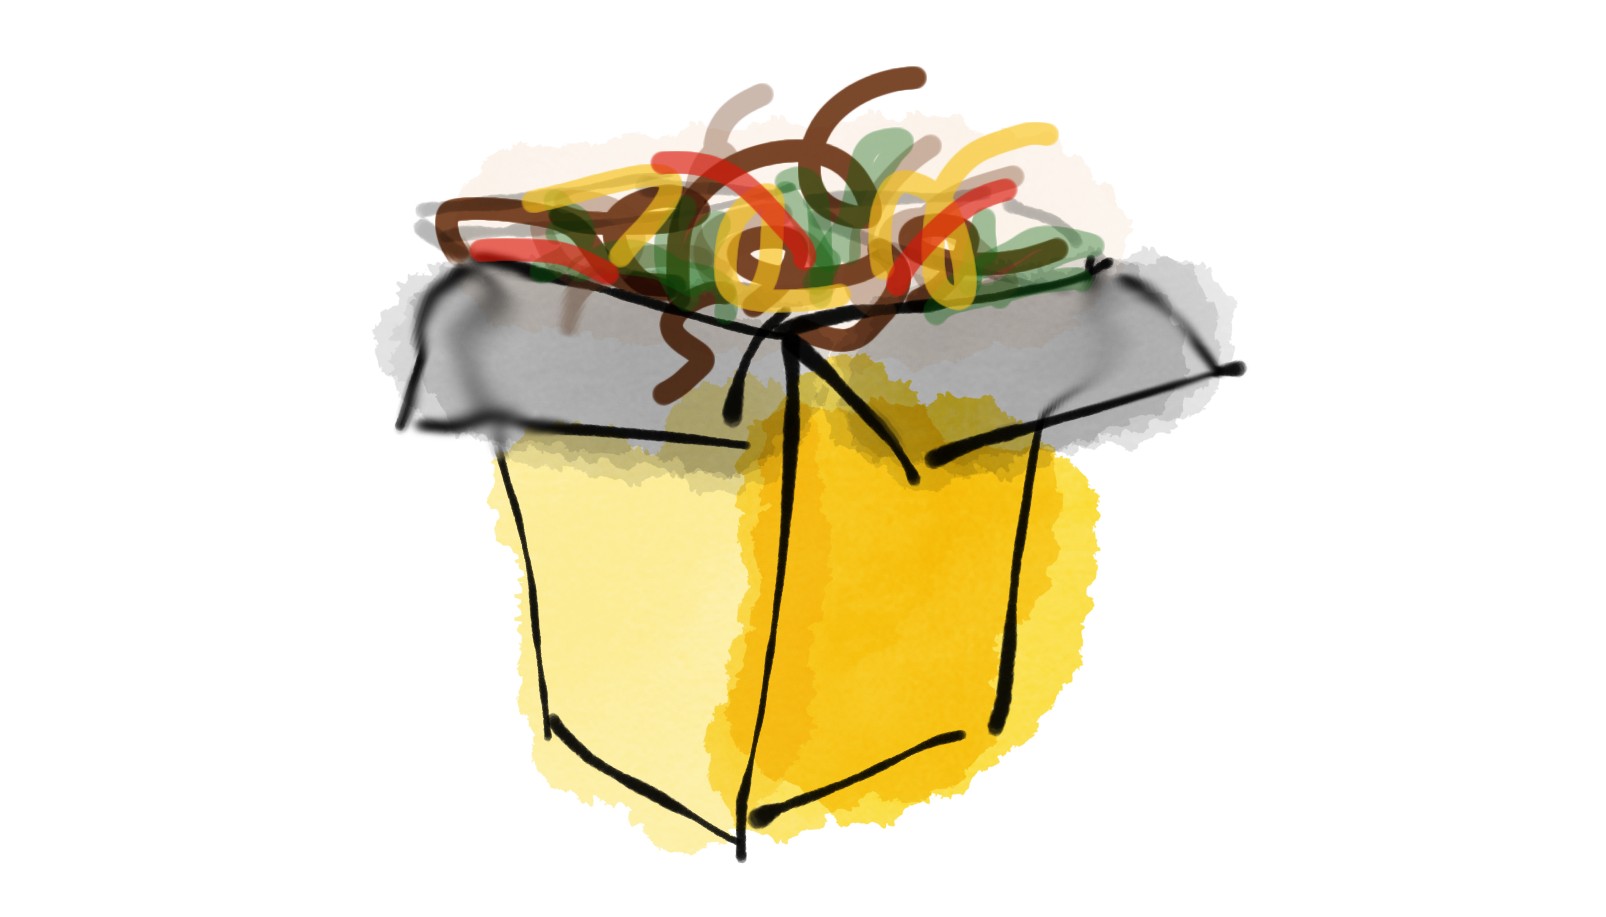 A drawing of a box of noodles in a carton box